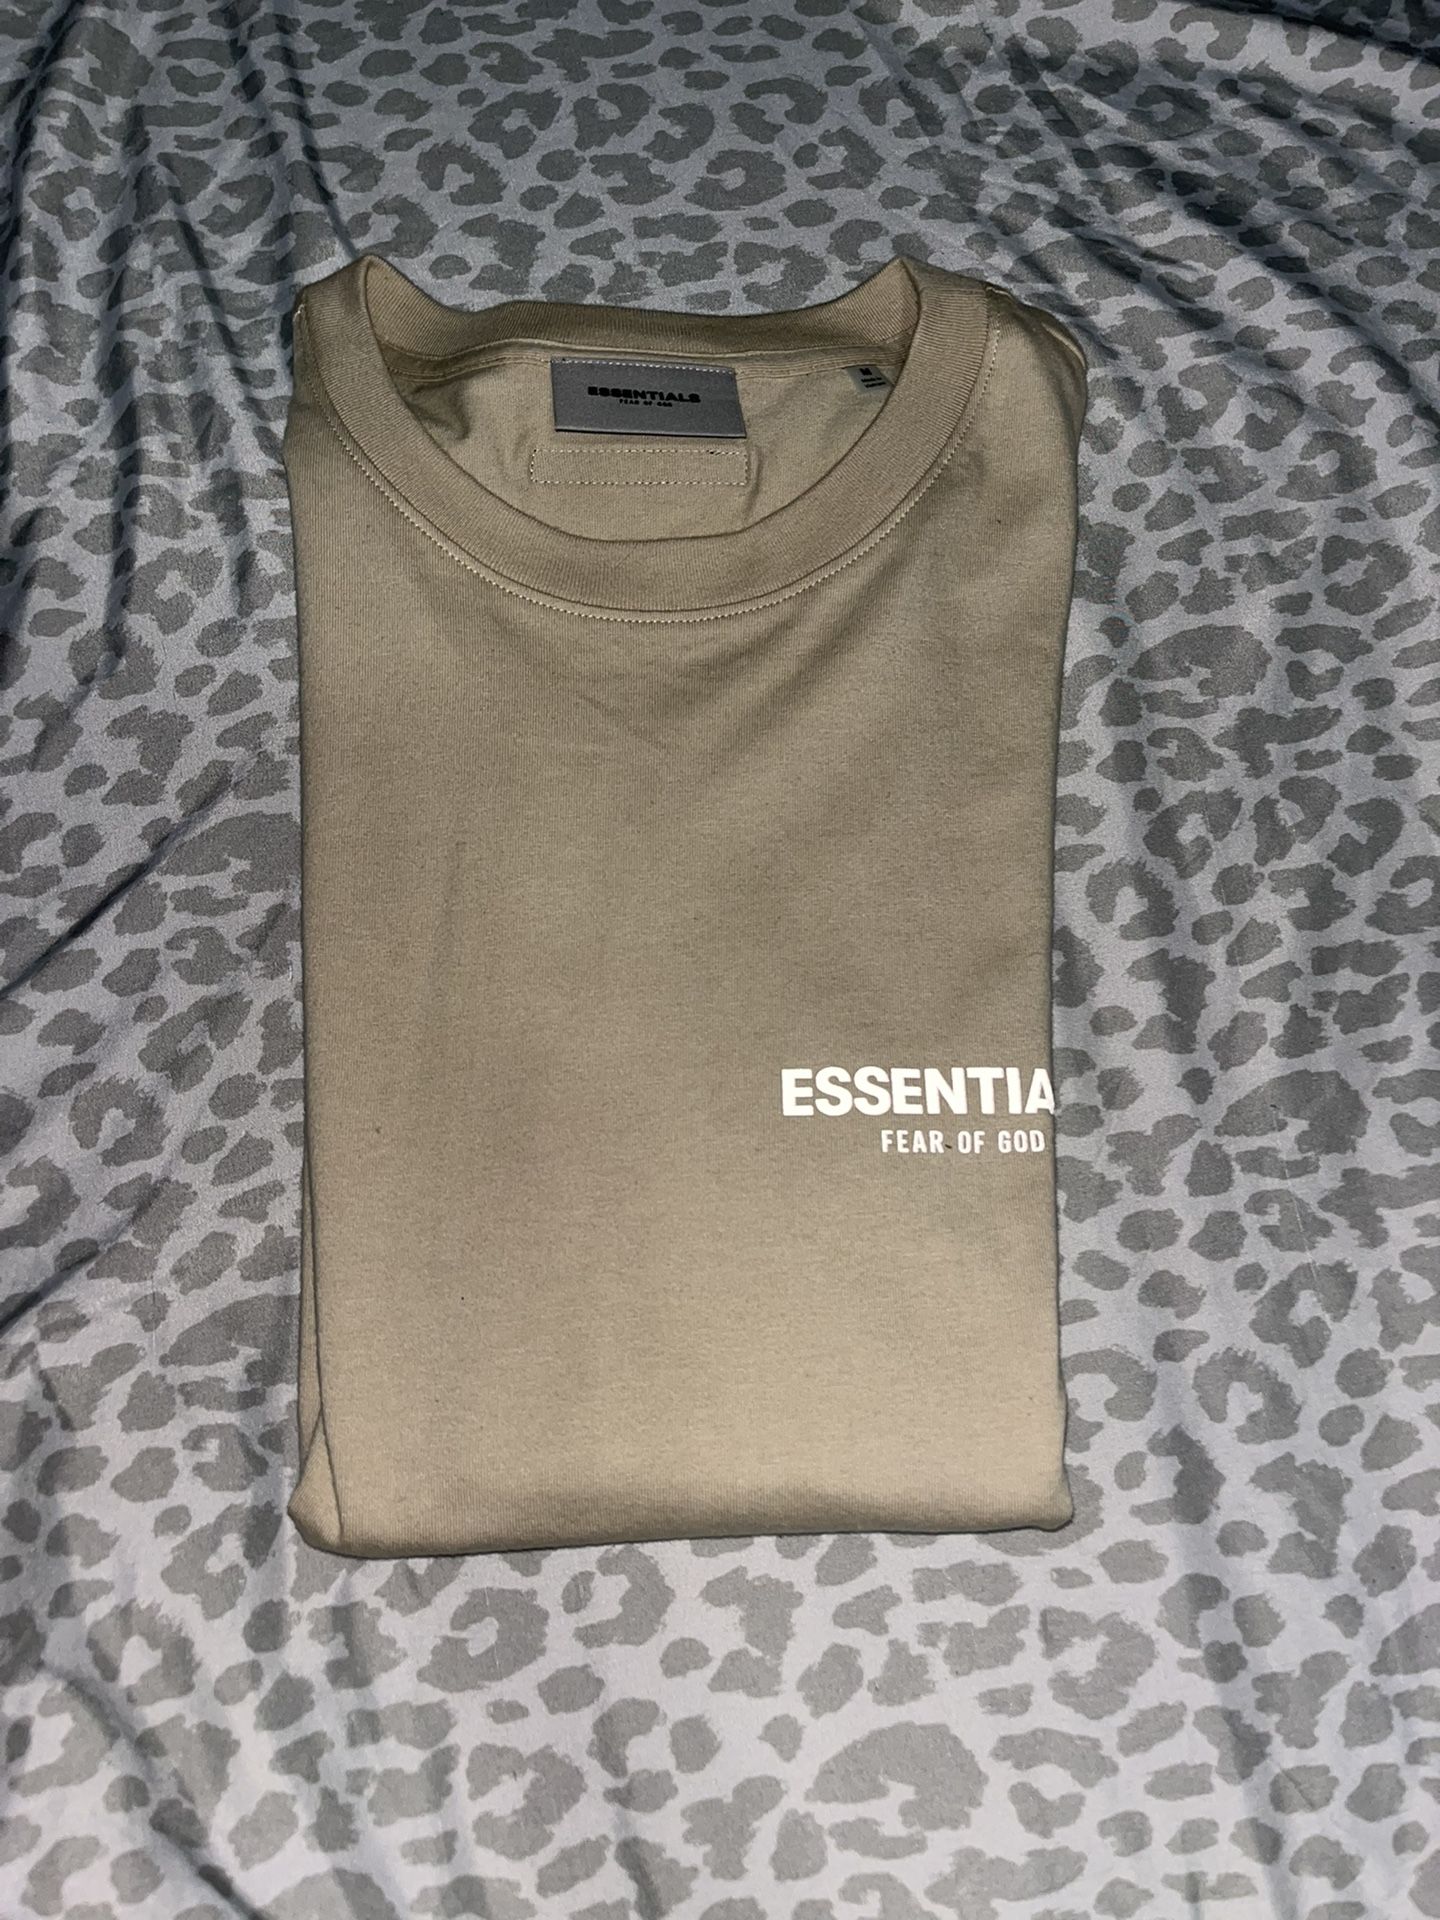 Essential Oversized T-shirt Size M Worn 1 Time Asking $50